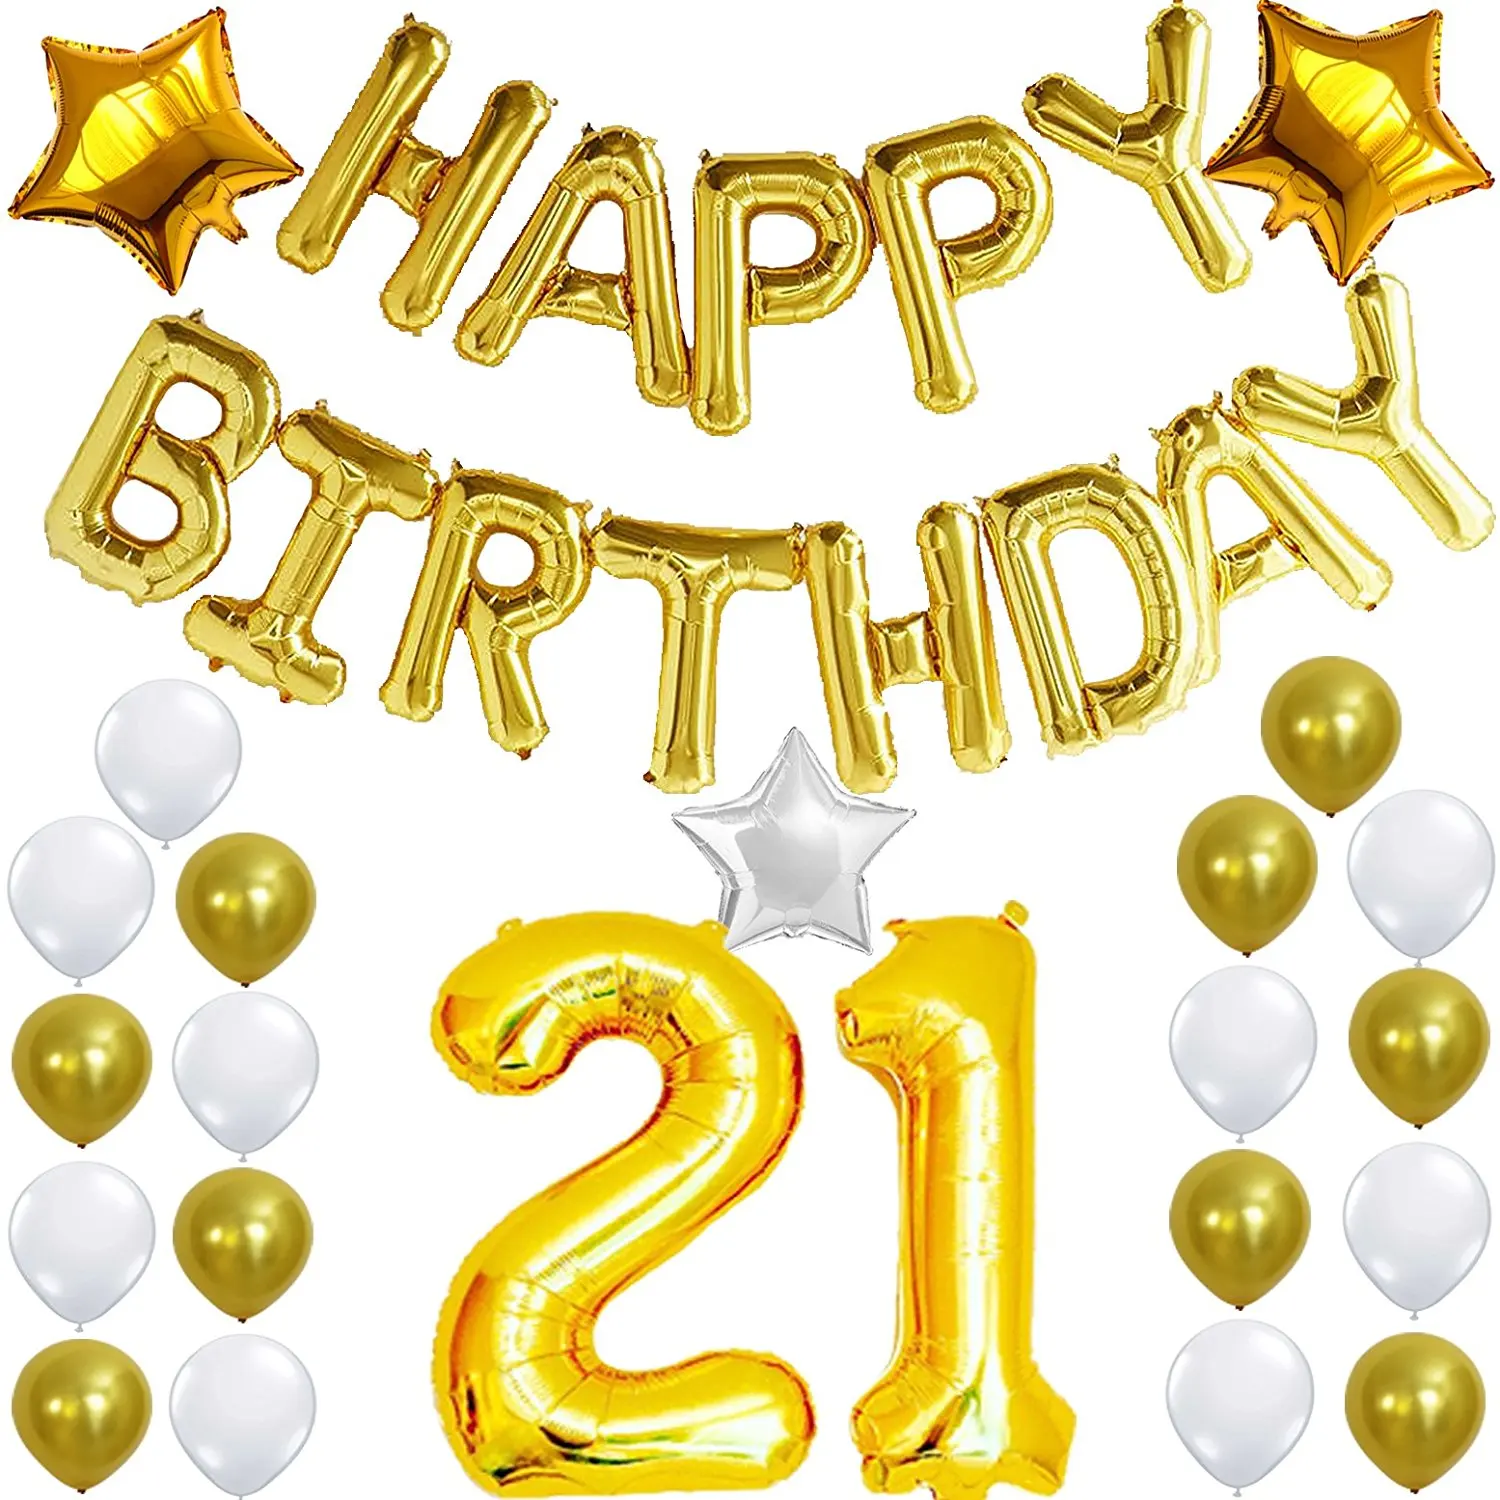 gold-21-balloons-gold-number-21-balloons-decorations-set-large-40